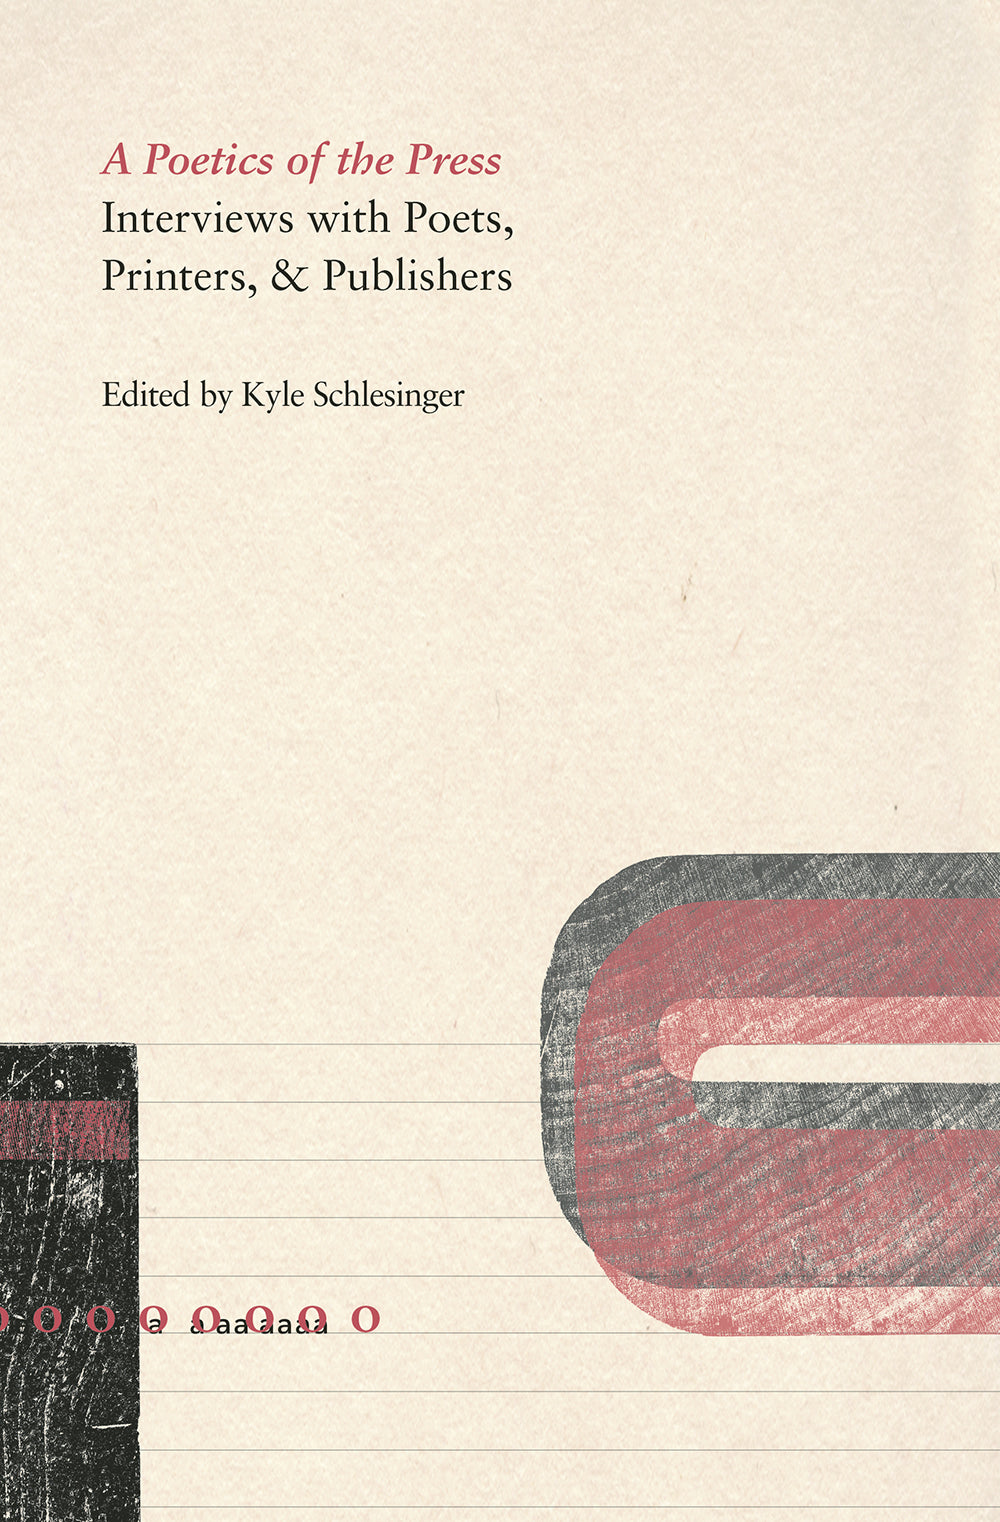 A Poetics of the Press: Interviews with Poets, Printers, & Publishers